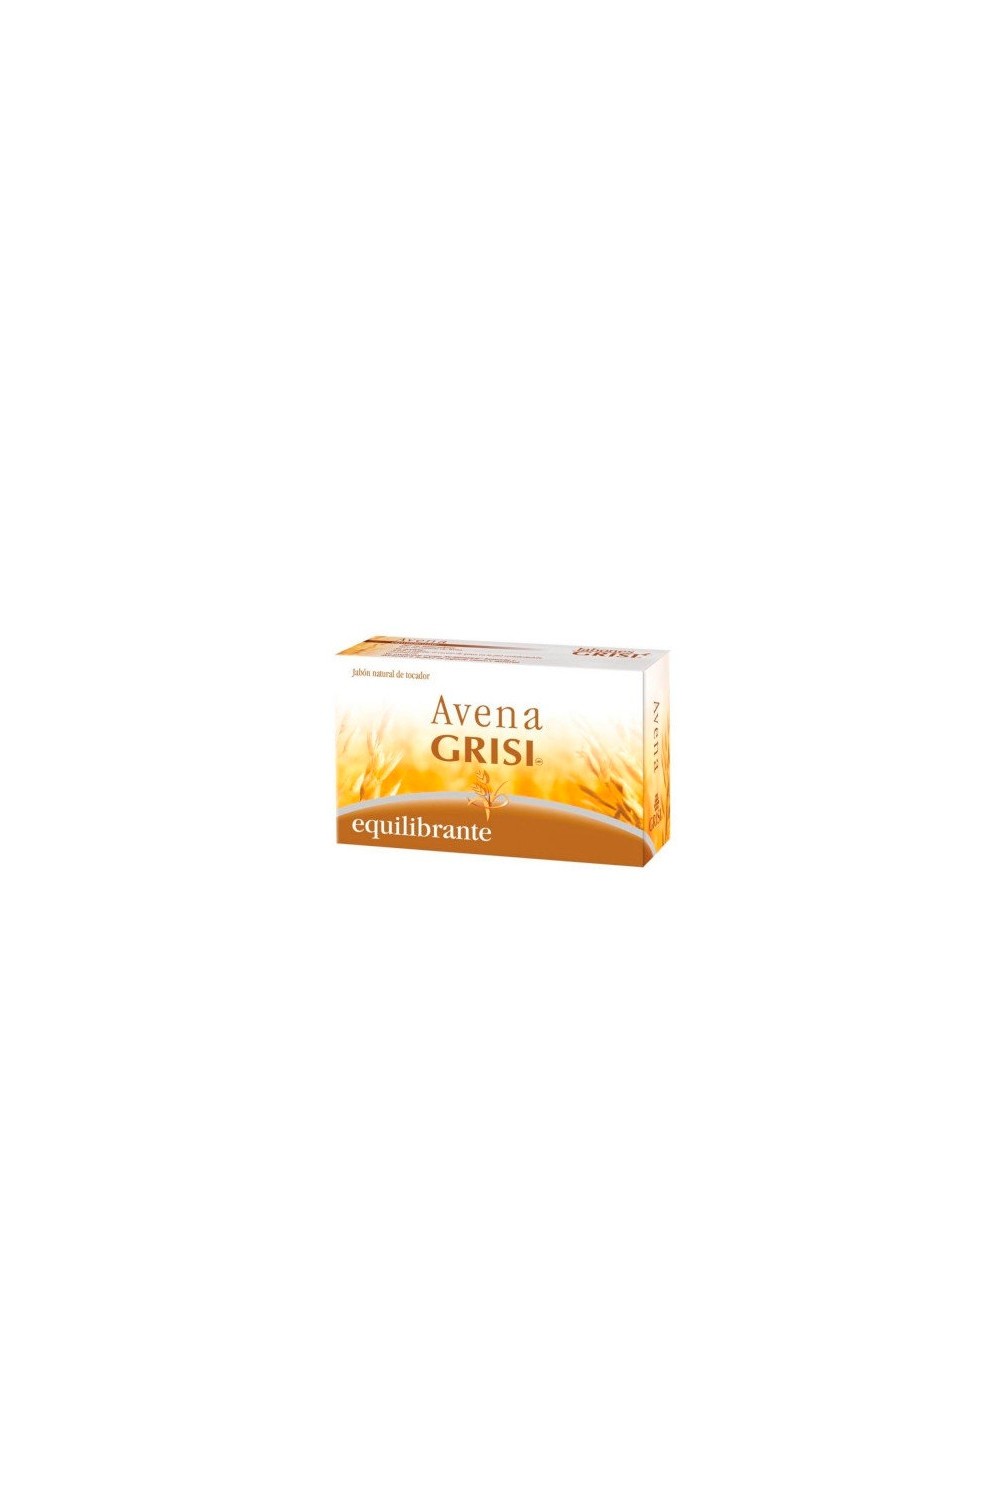 Grisi Dermo Soap Oatmeal 100g